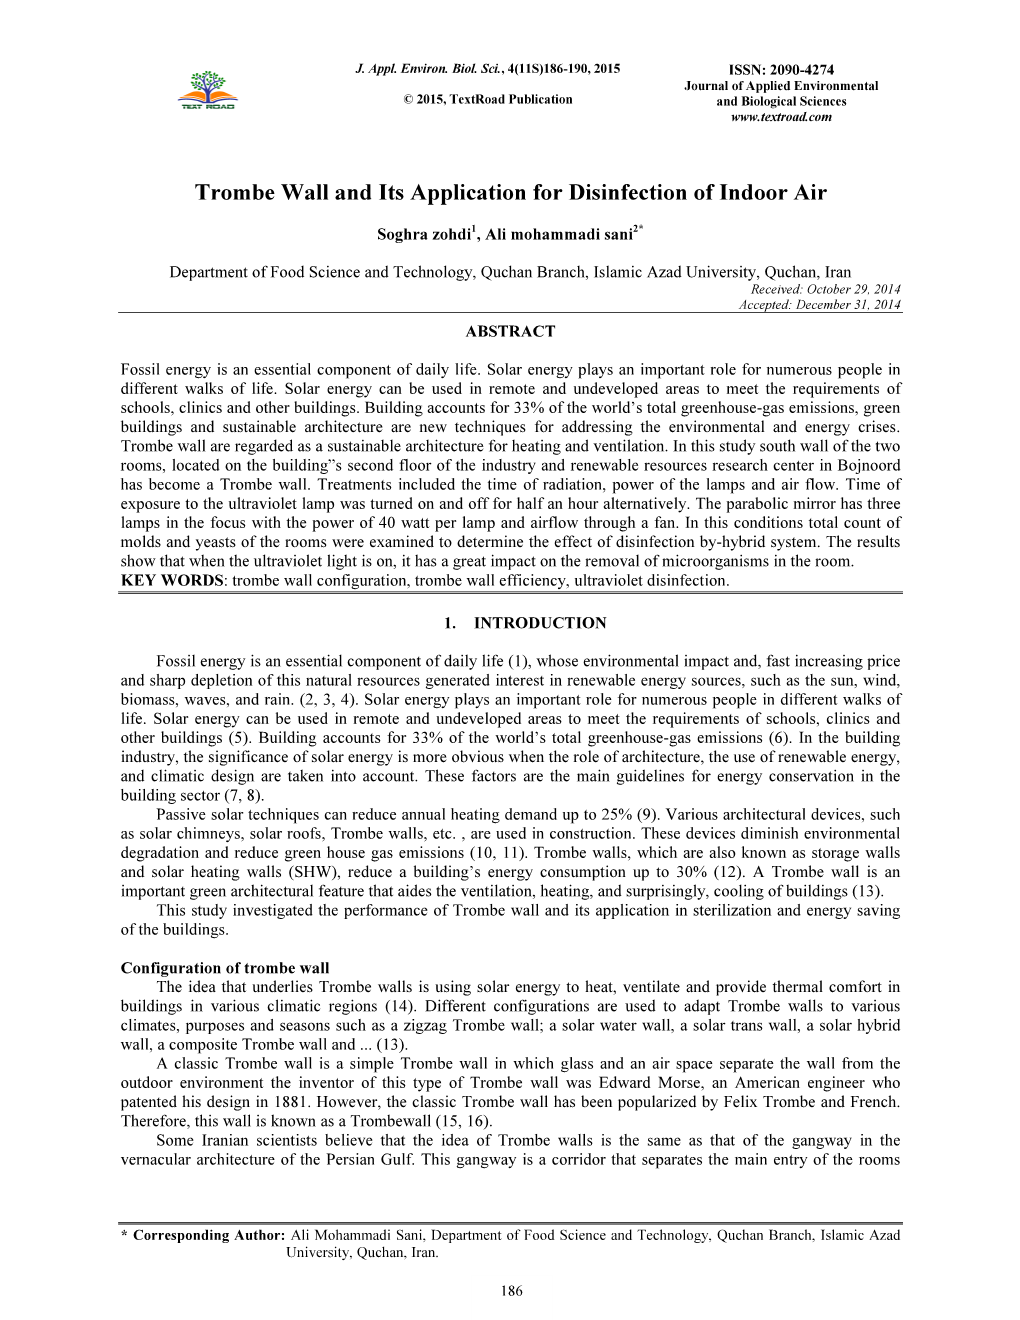 Trombe Wall and Its Application for Disinfection of Indoor Air